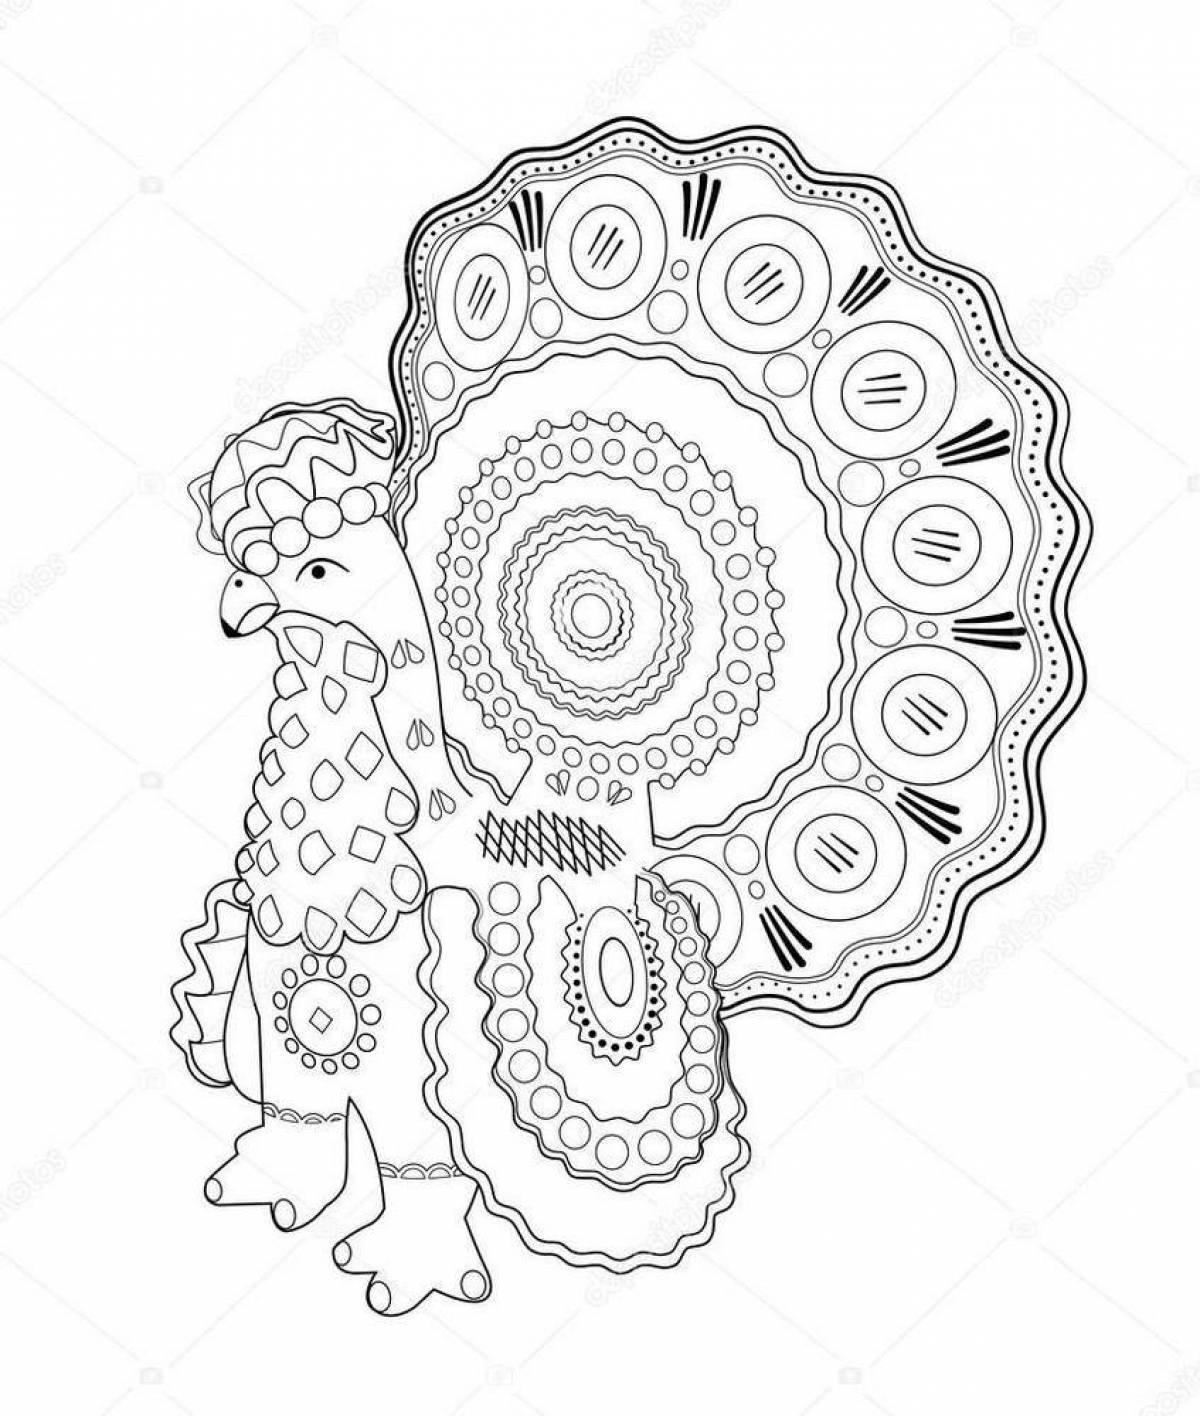 Coloring page festive Dymkovo rooster